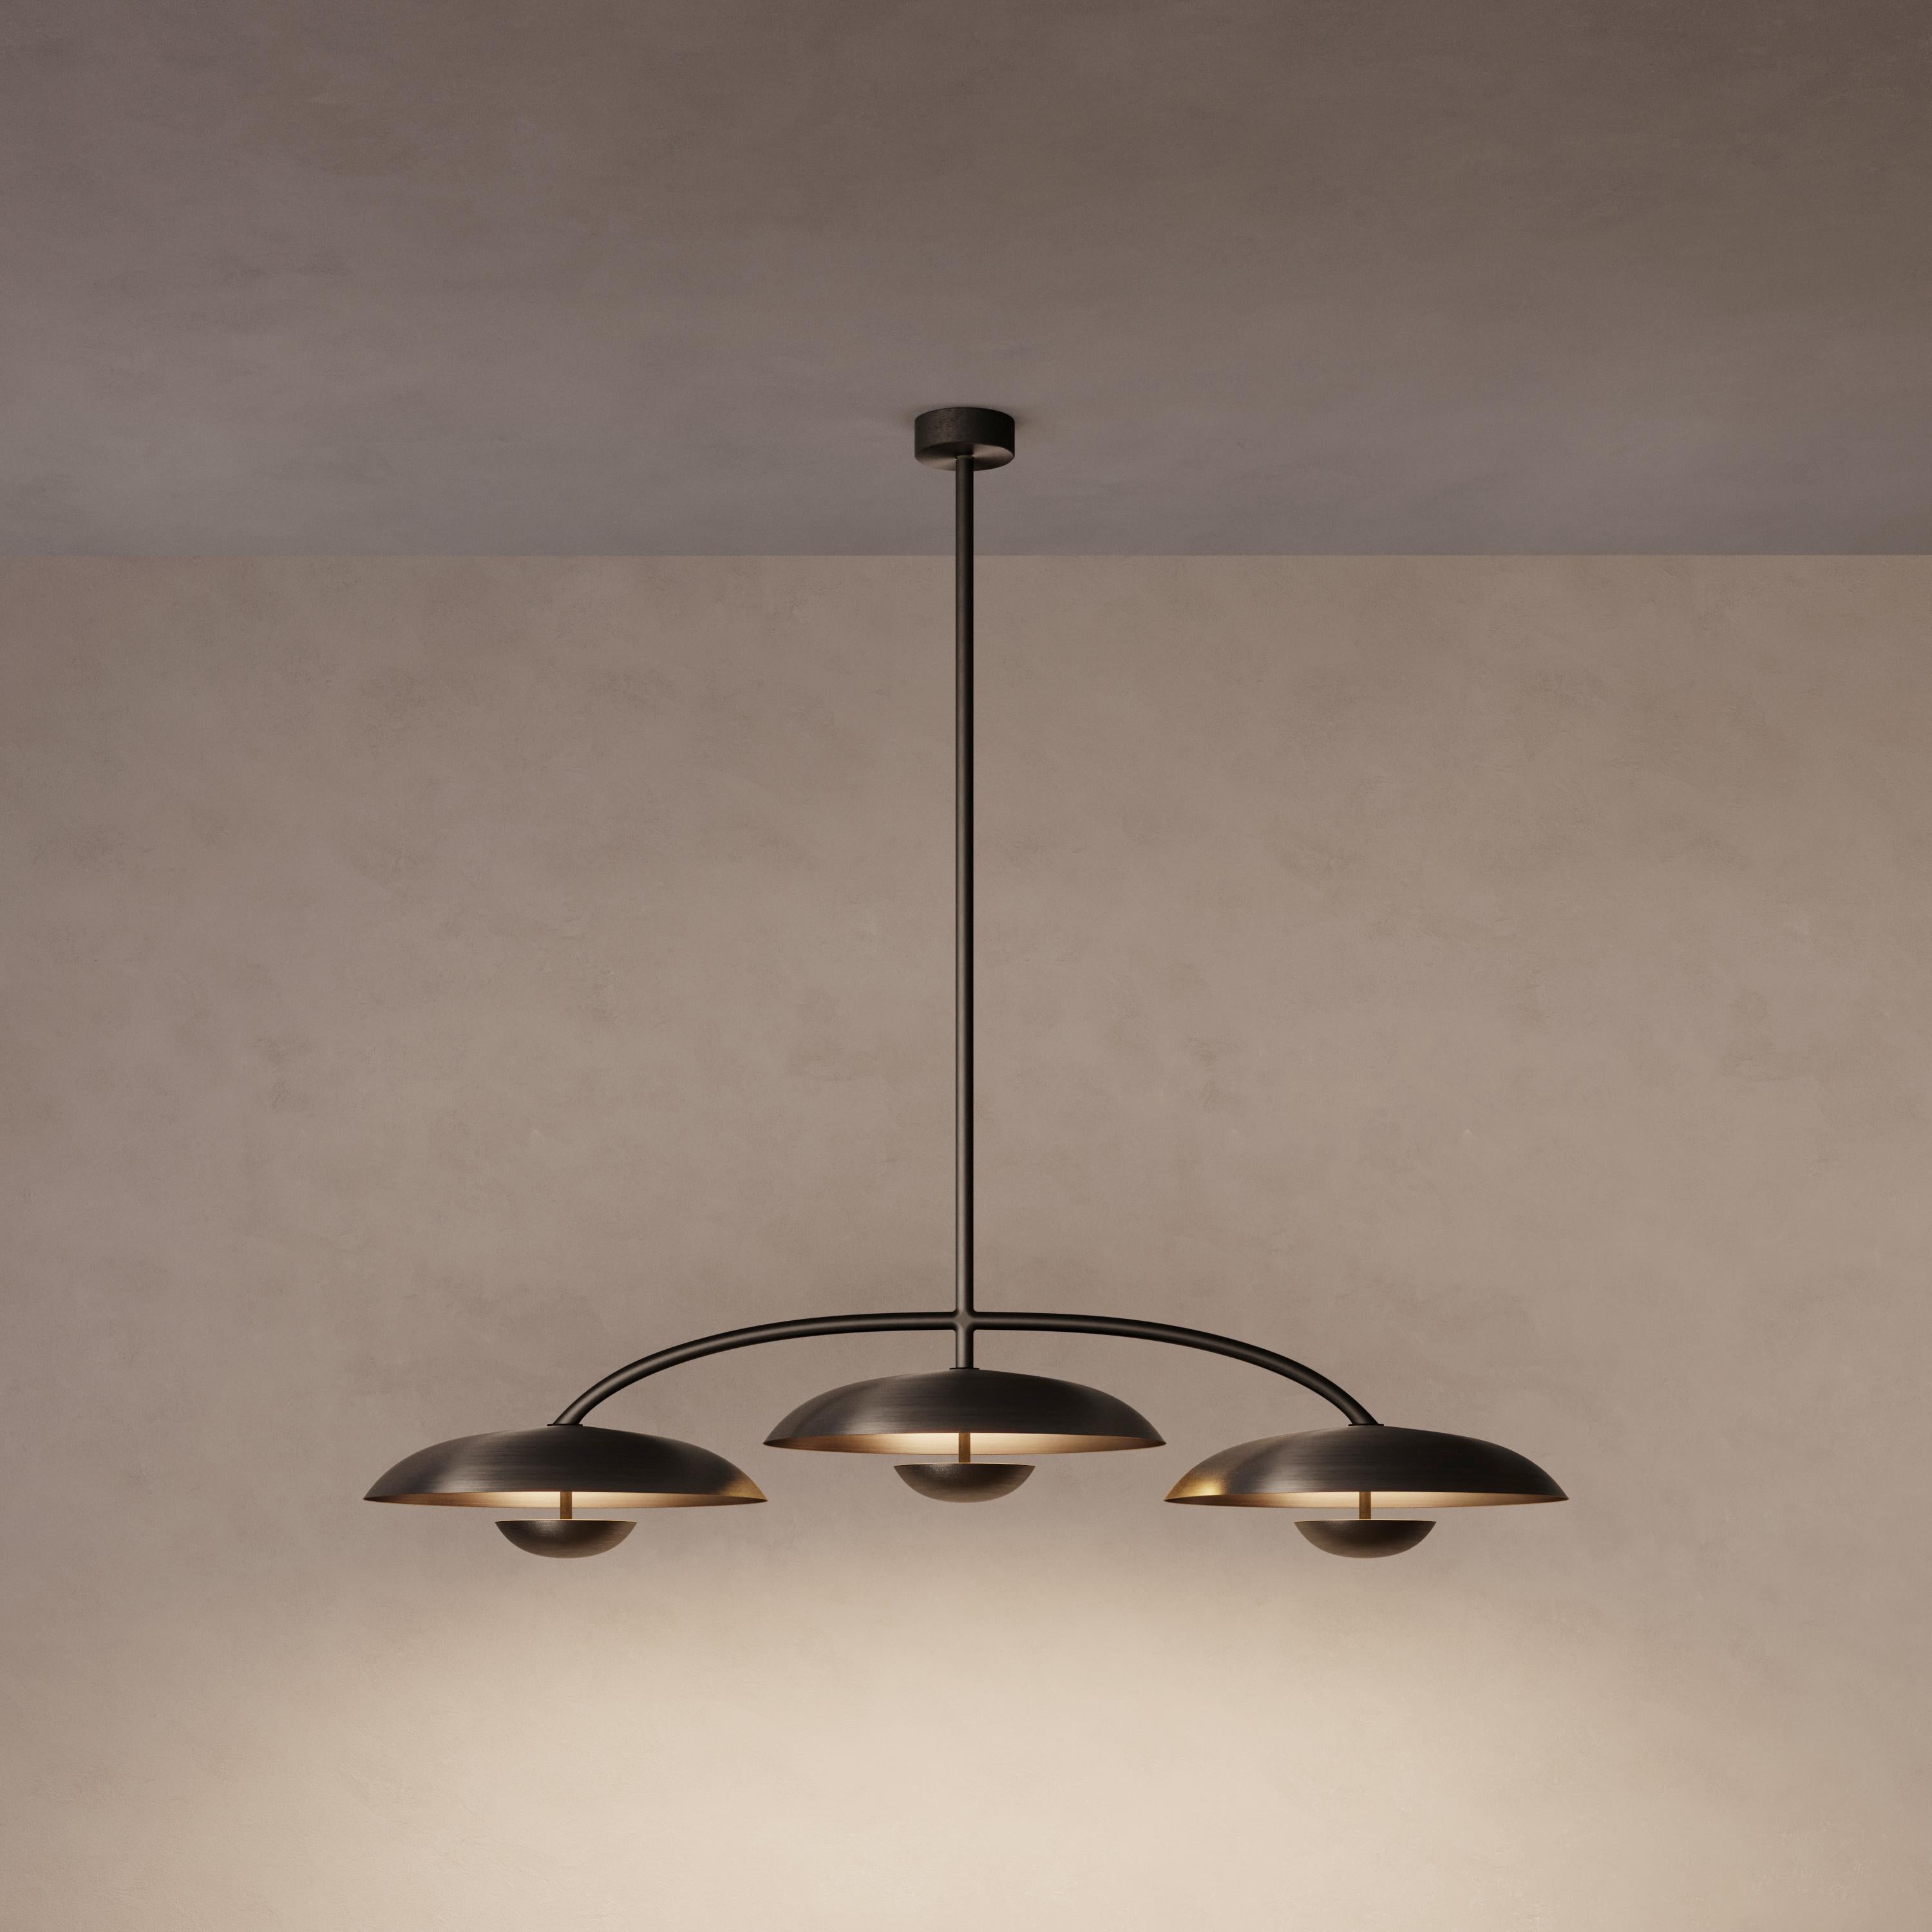 Trio for three, a unique ceiling light composed by a cluster of lighting components. Combining patinated brass plates and finely brushed brass framework, the Orbit Trio ceiling light is softly illuminated with LED elements from within.
 
This